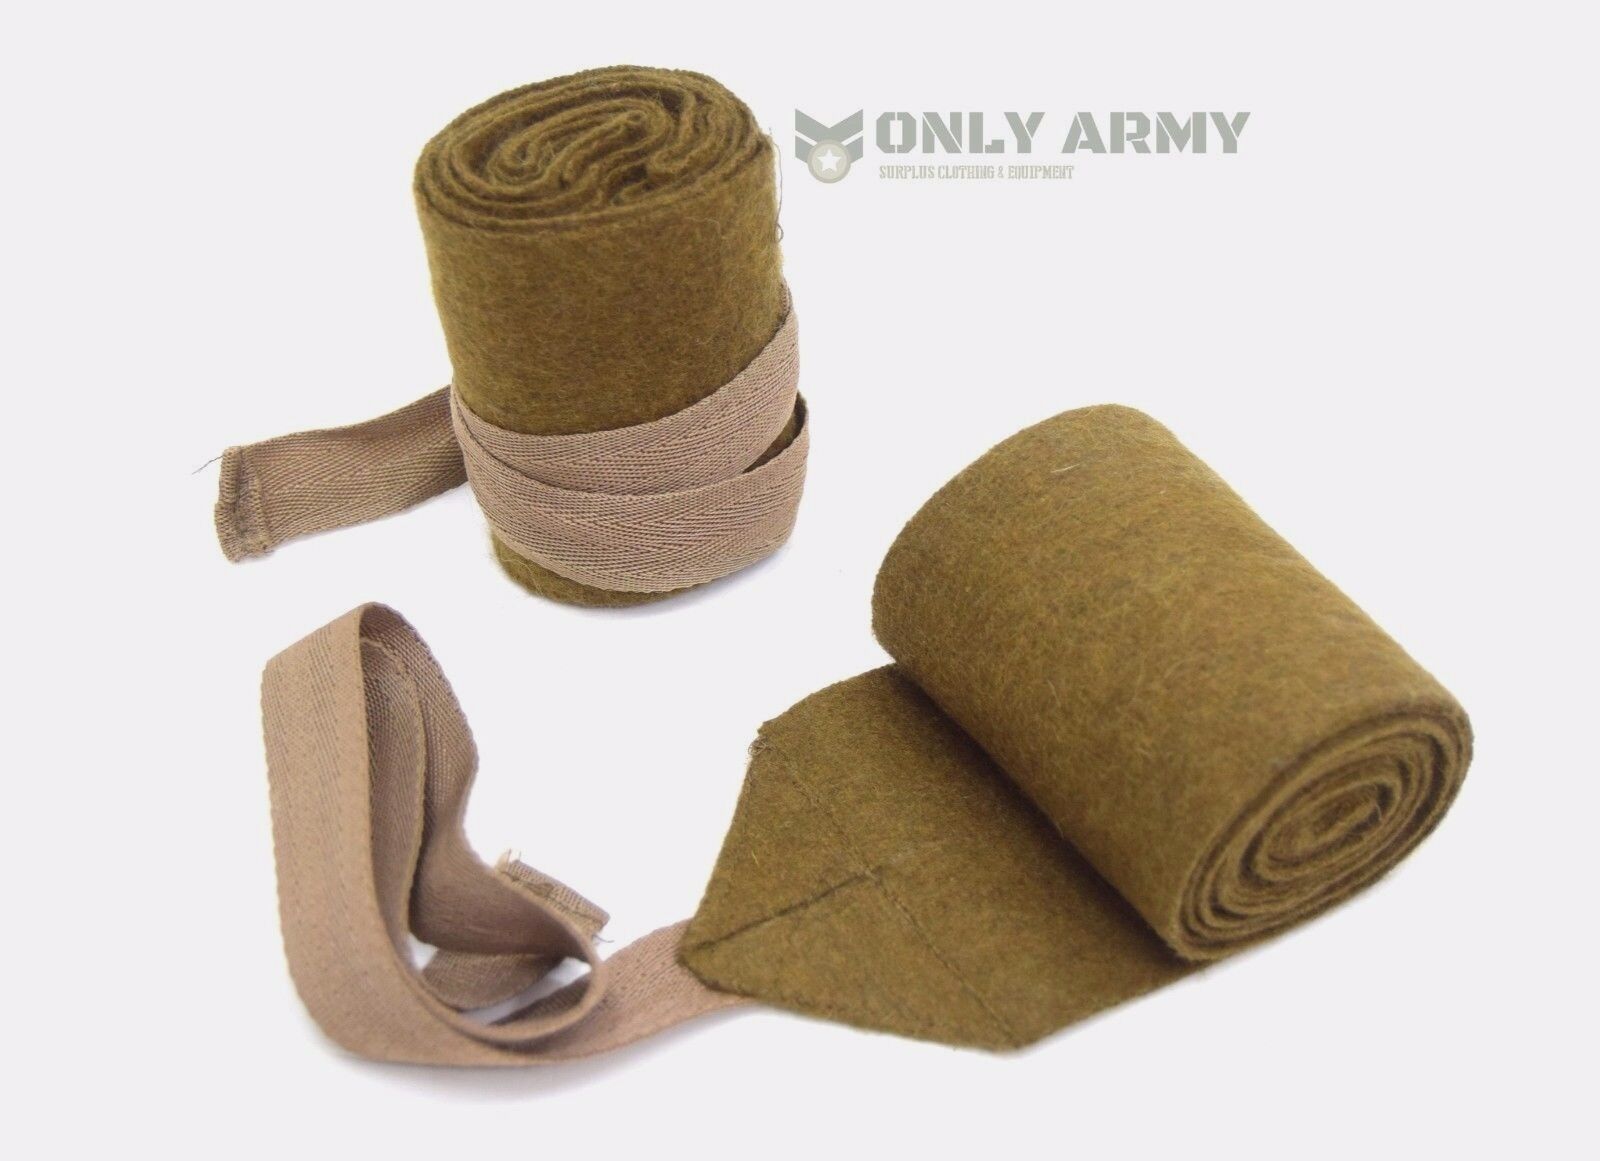 1940's WW2 British Army Style Puttees Extra Long Wool Wraps Gaiters Military